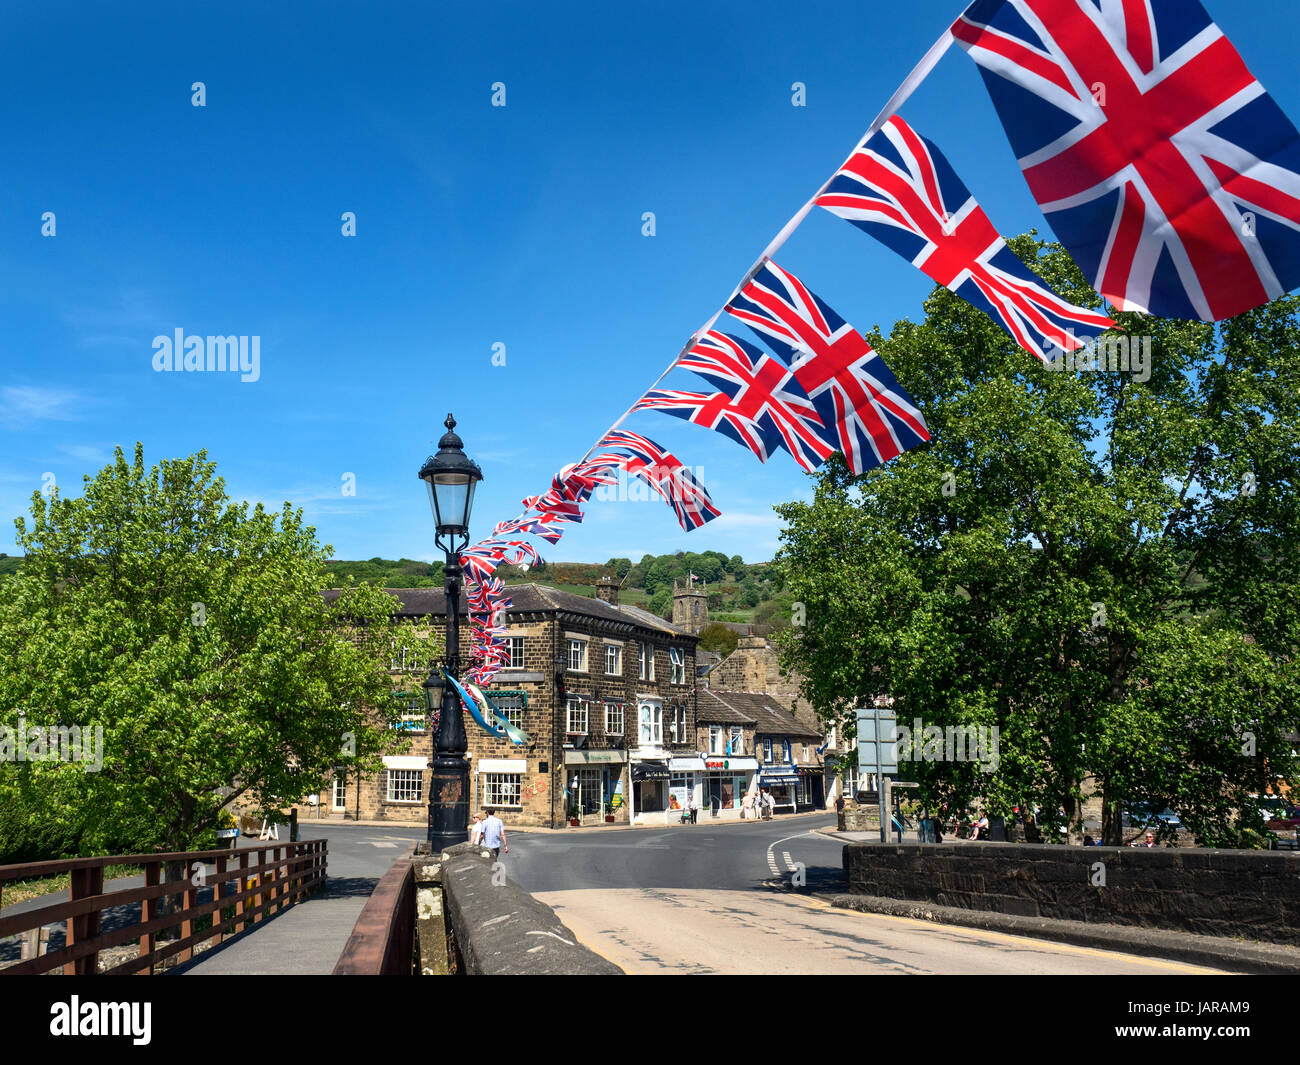 Union Jack Bunting on the Bridge over the River Nidd at Pateley Bridge North Yorkshire England Stock Photo